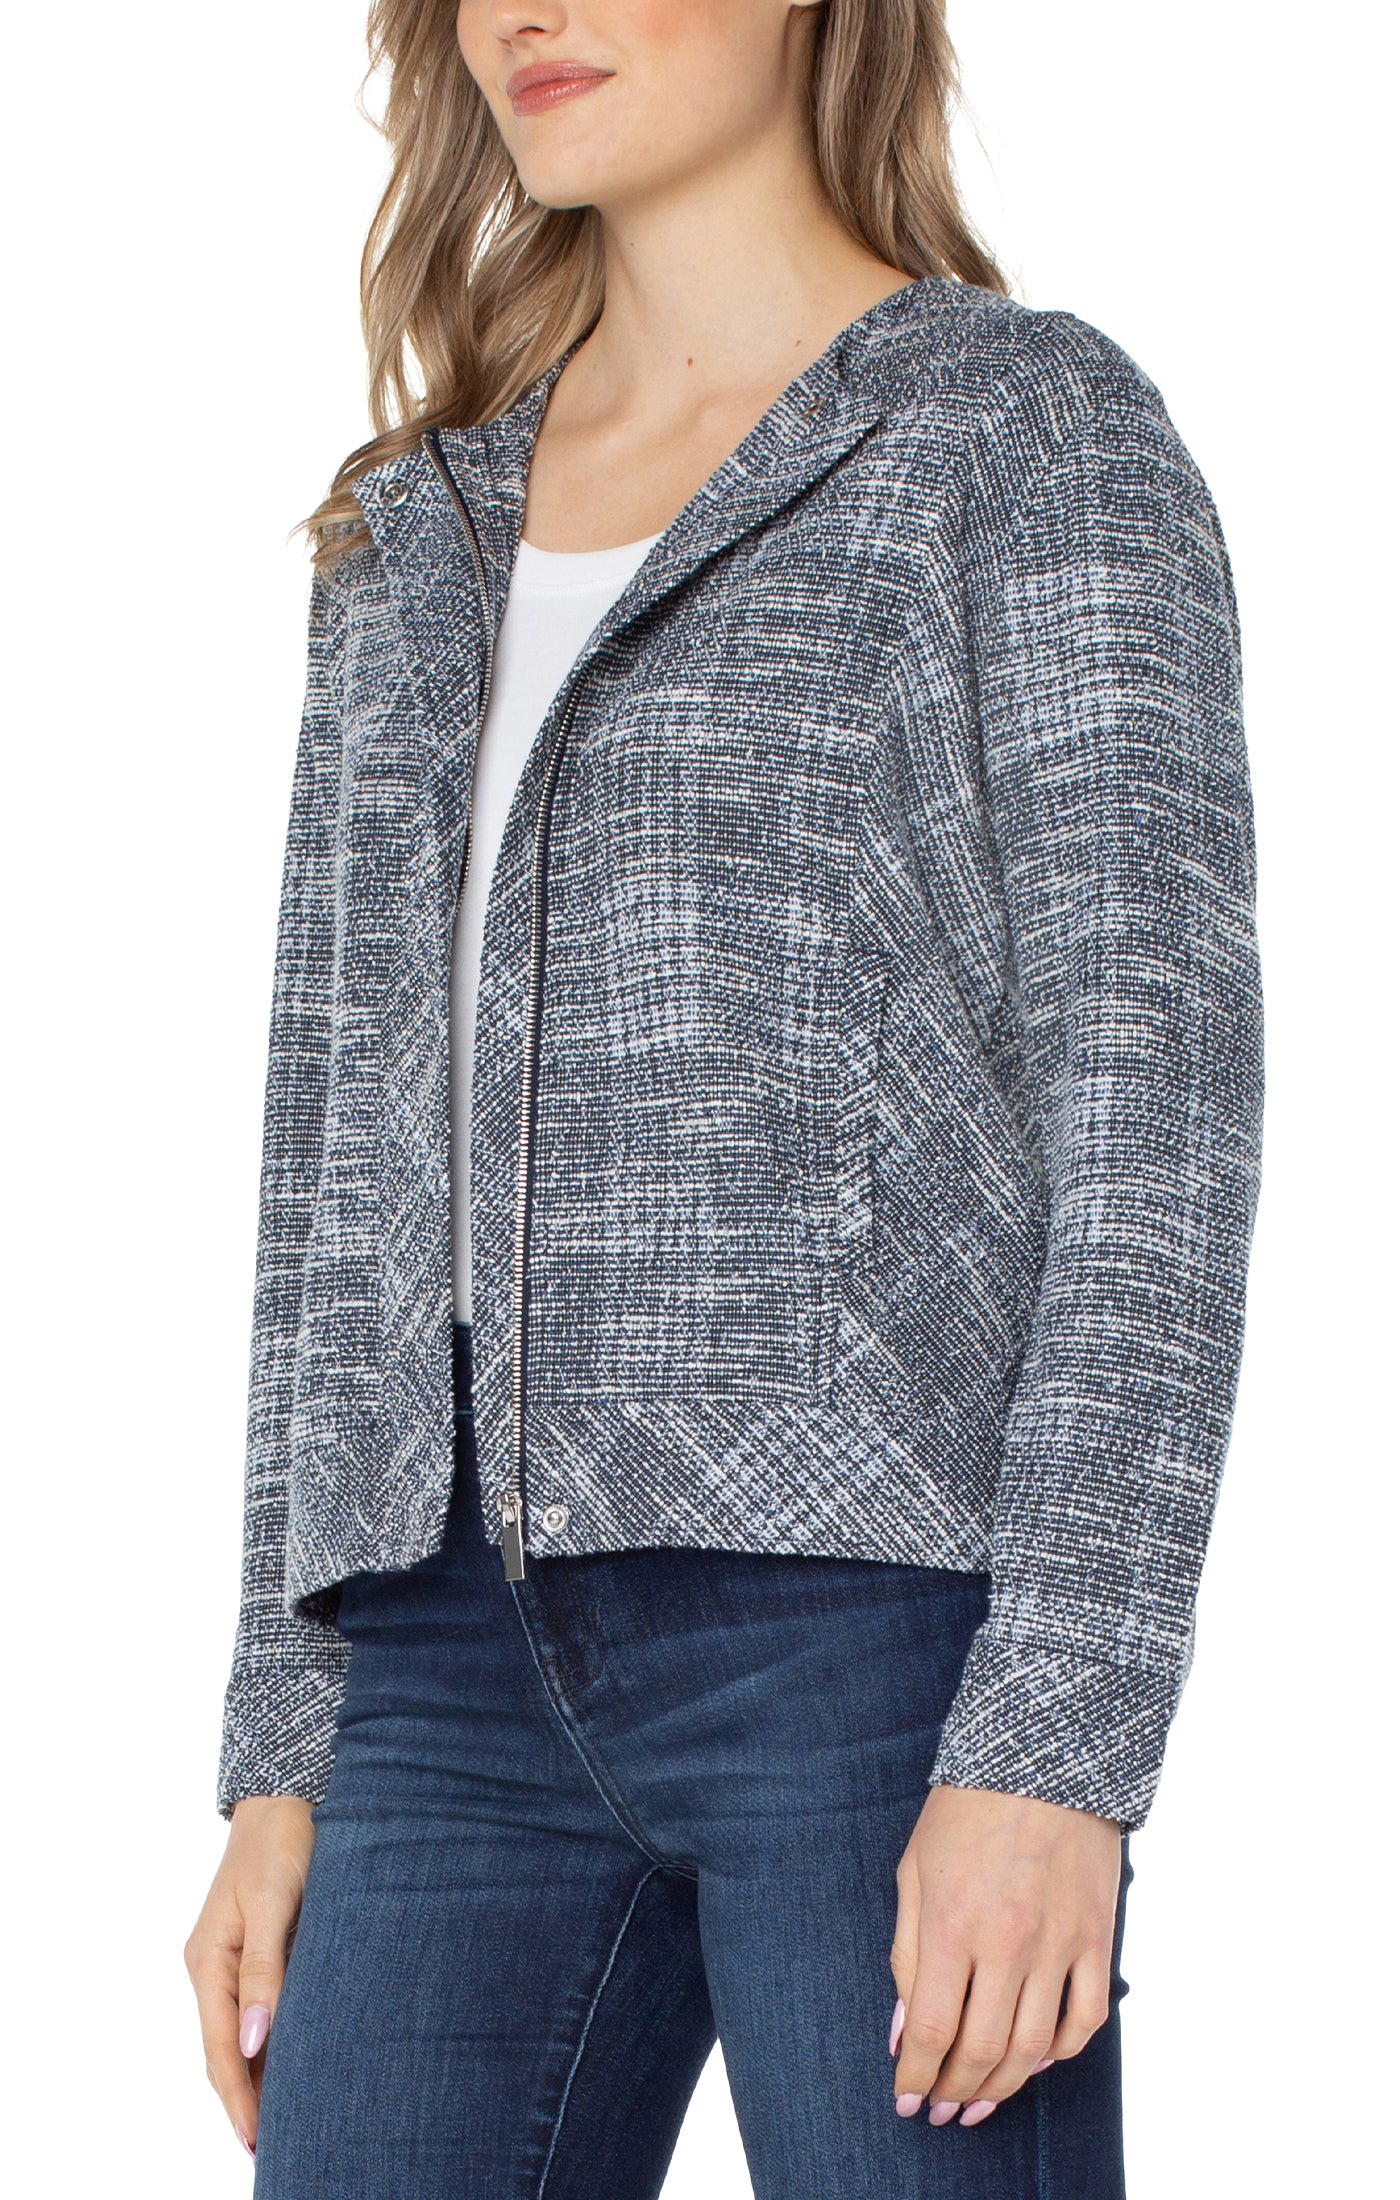 Liverpool Casual Jacket - Royal Navy Plaid Boucle Knit Side View